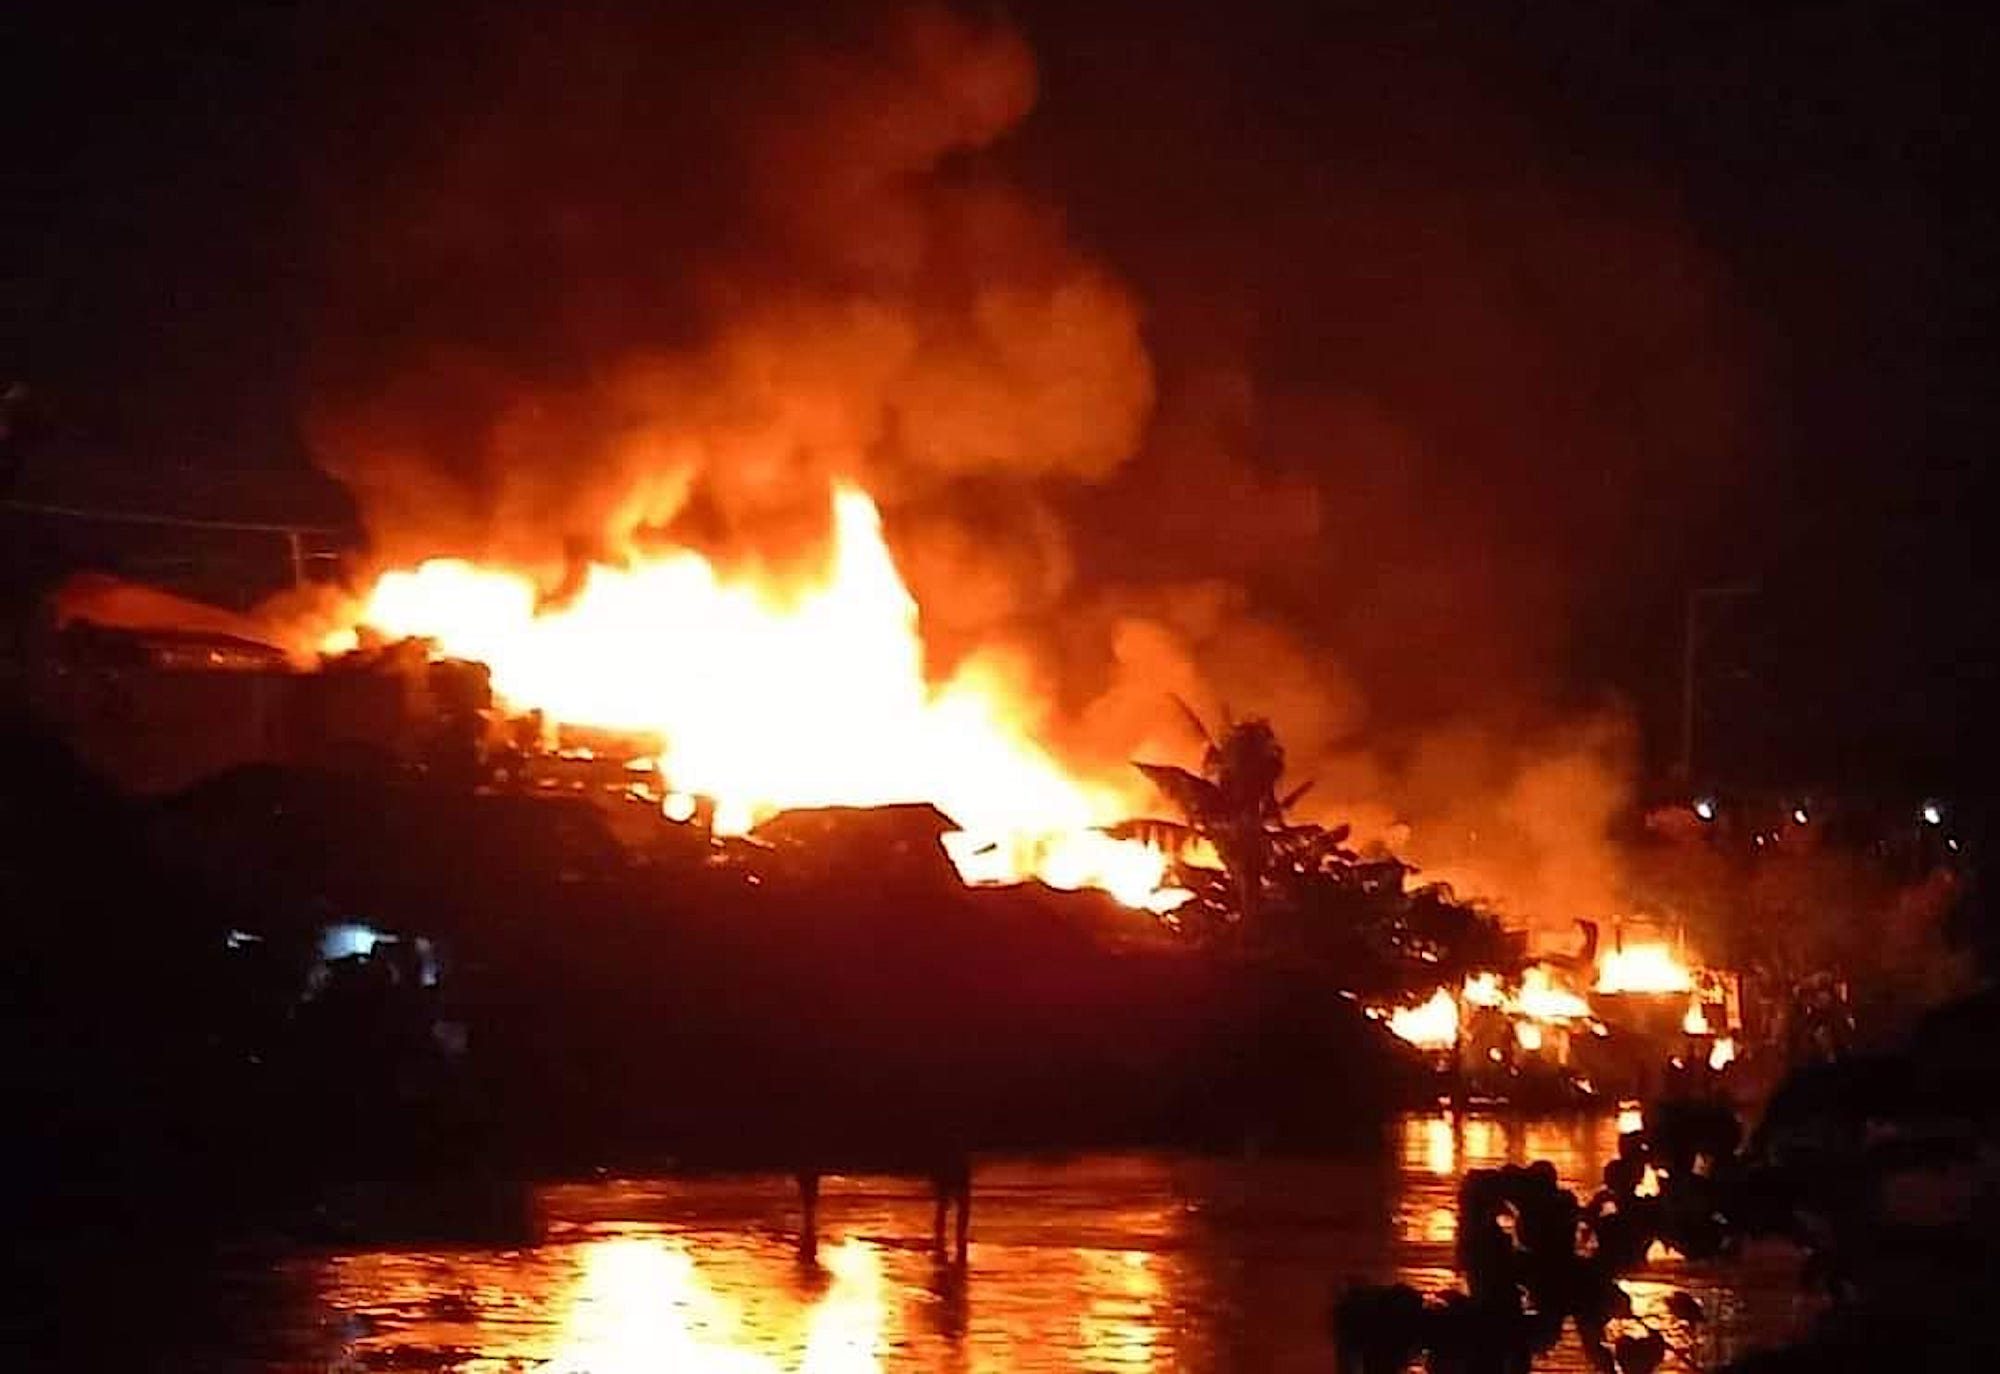 Over 250 Cebuanos lose homes to fire on eve of All Saints’ Day